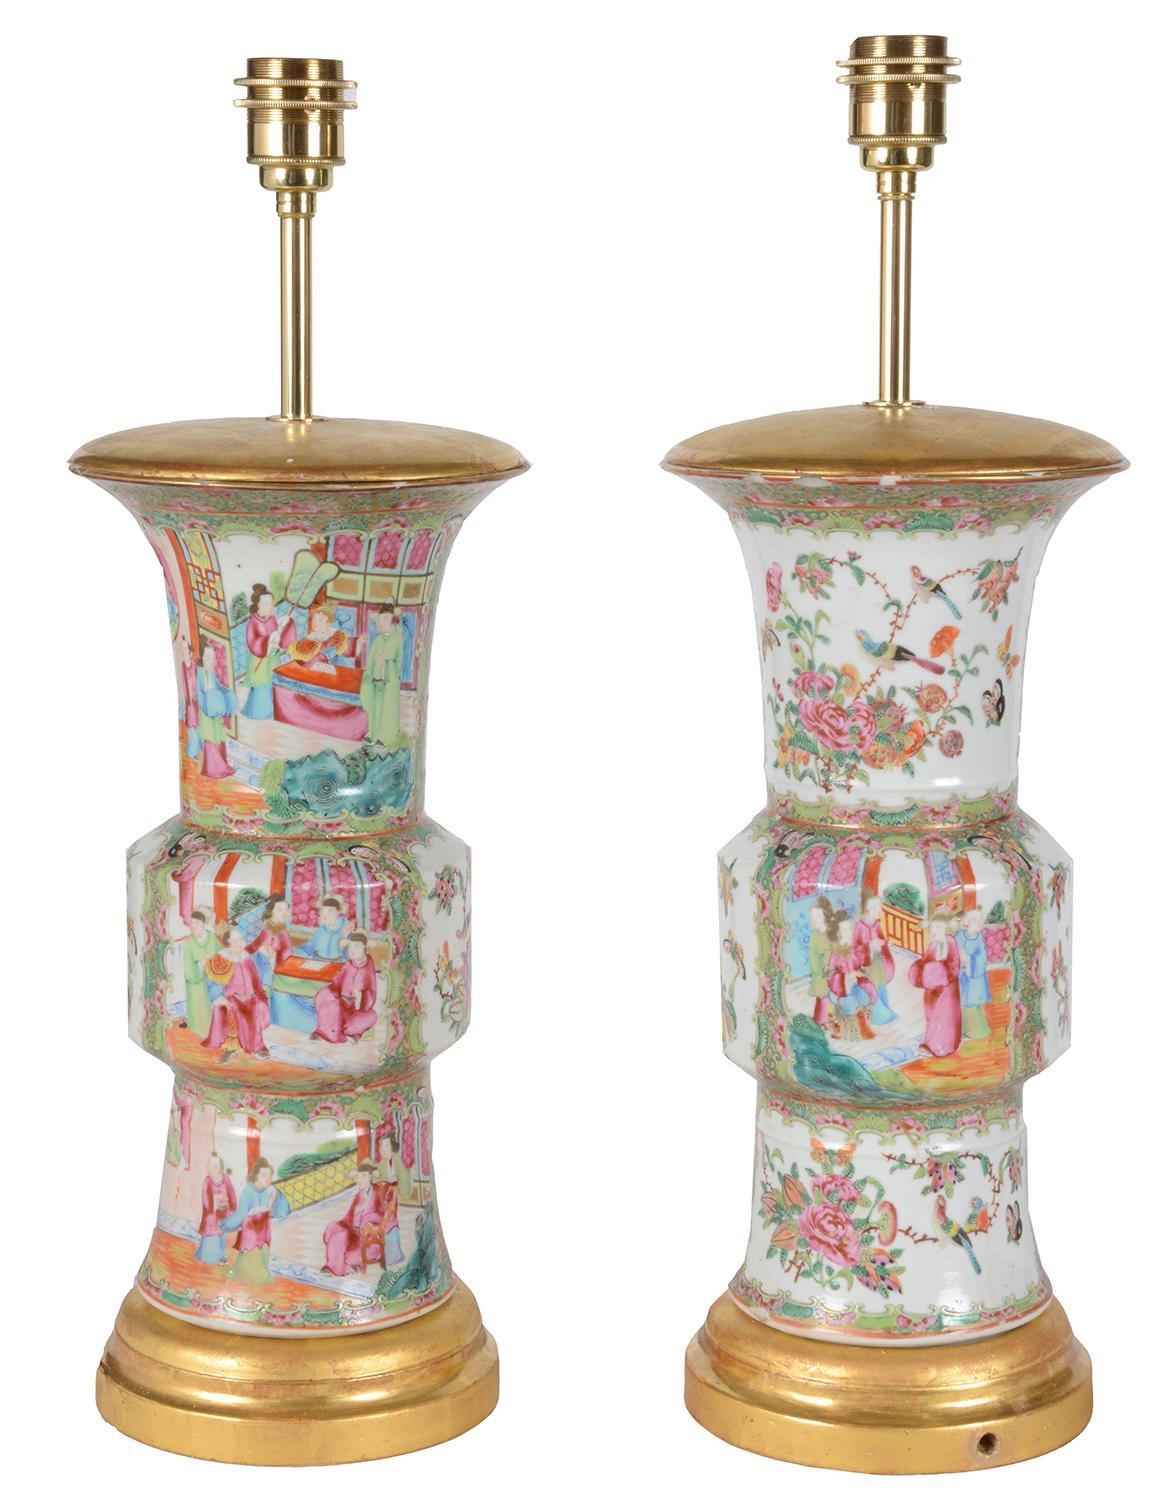 Pair 19th century Chinese Rose medallion / Cantonese spill vases, each with the classical Green ground, wonderful floral and foliate decoration with exotic birds, inset hand painted scenes of various courtiers. Mounted with carved gilt wood bases